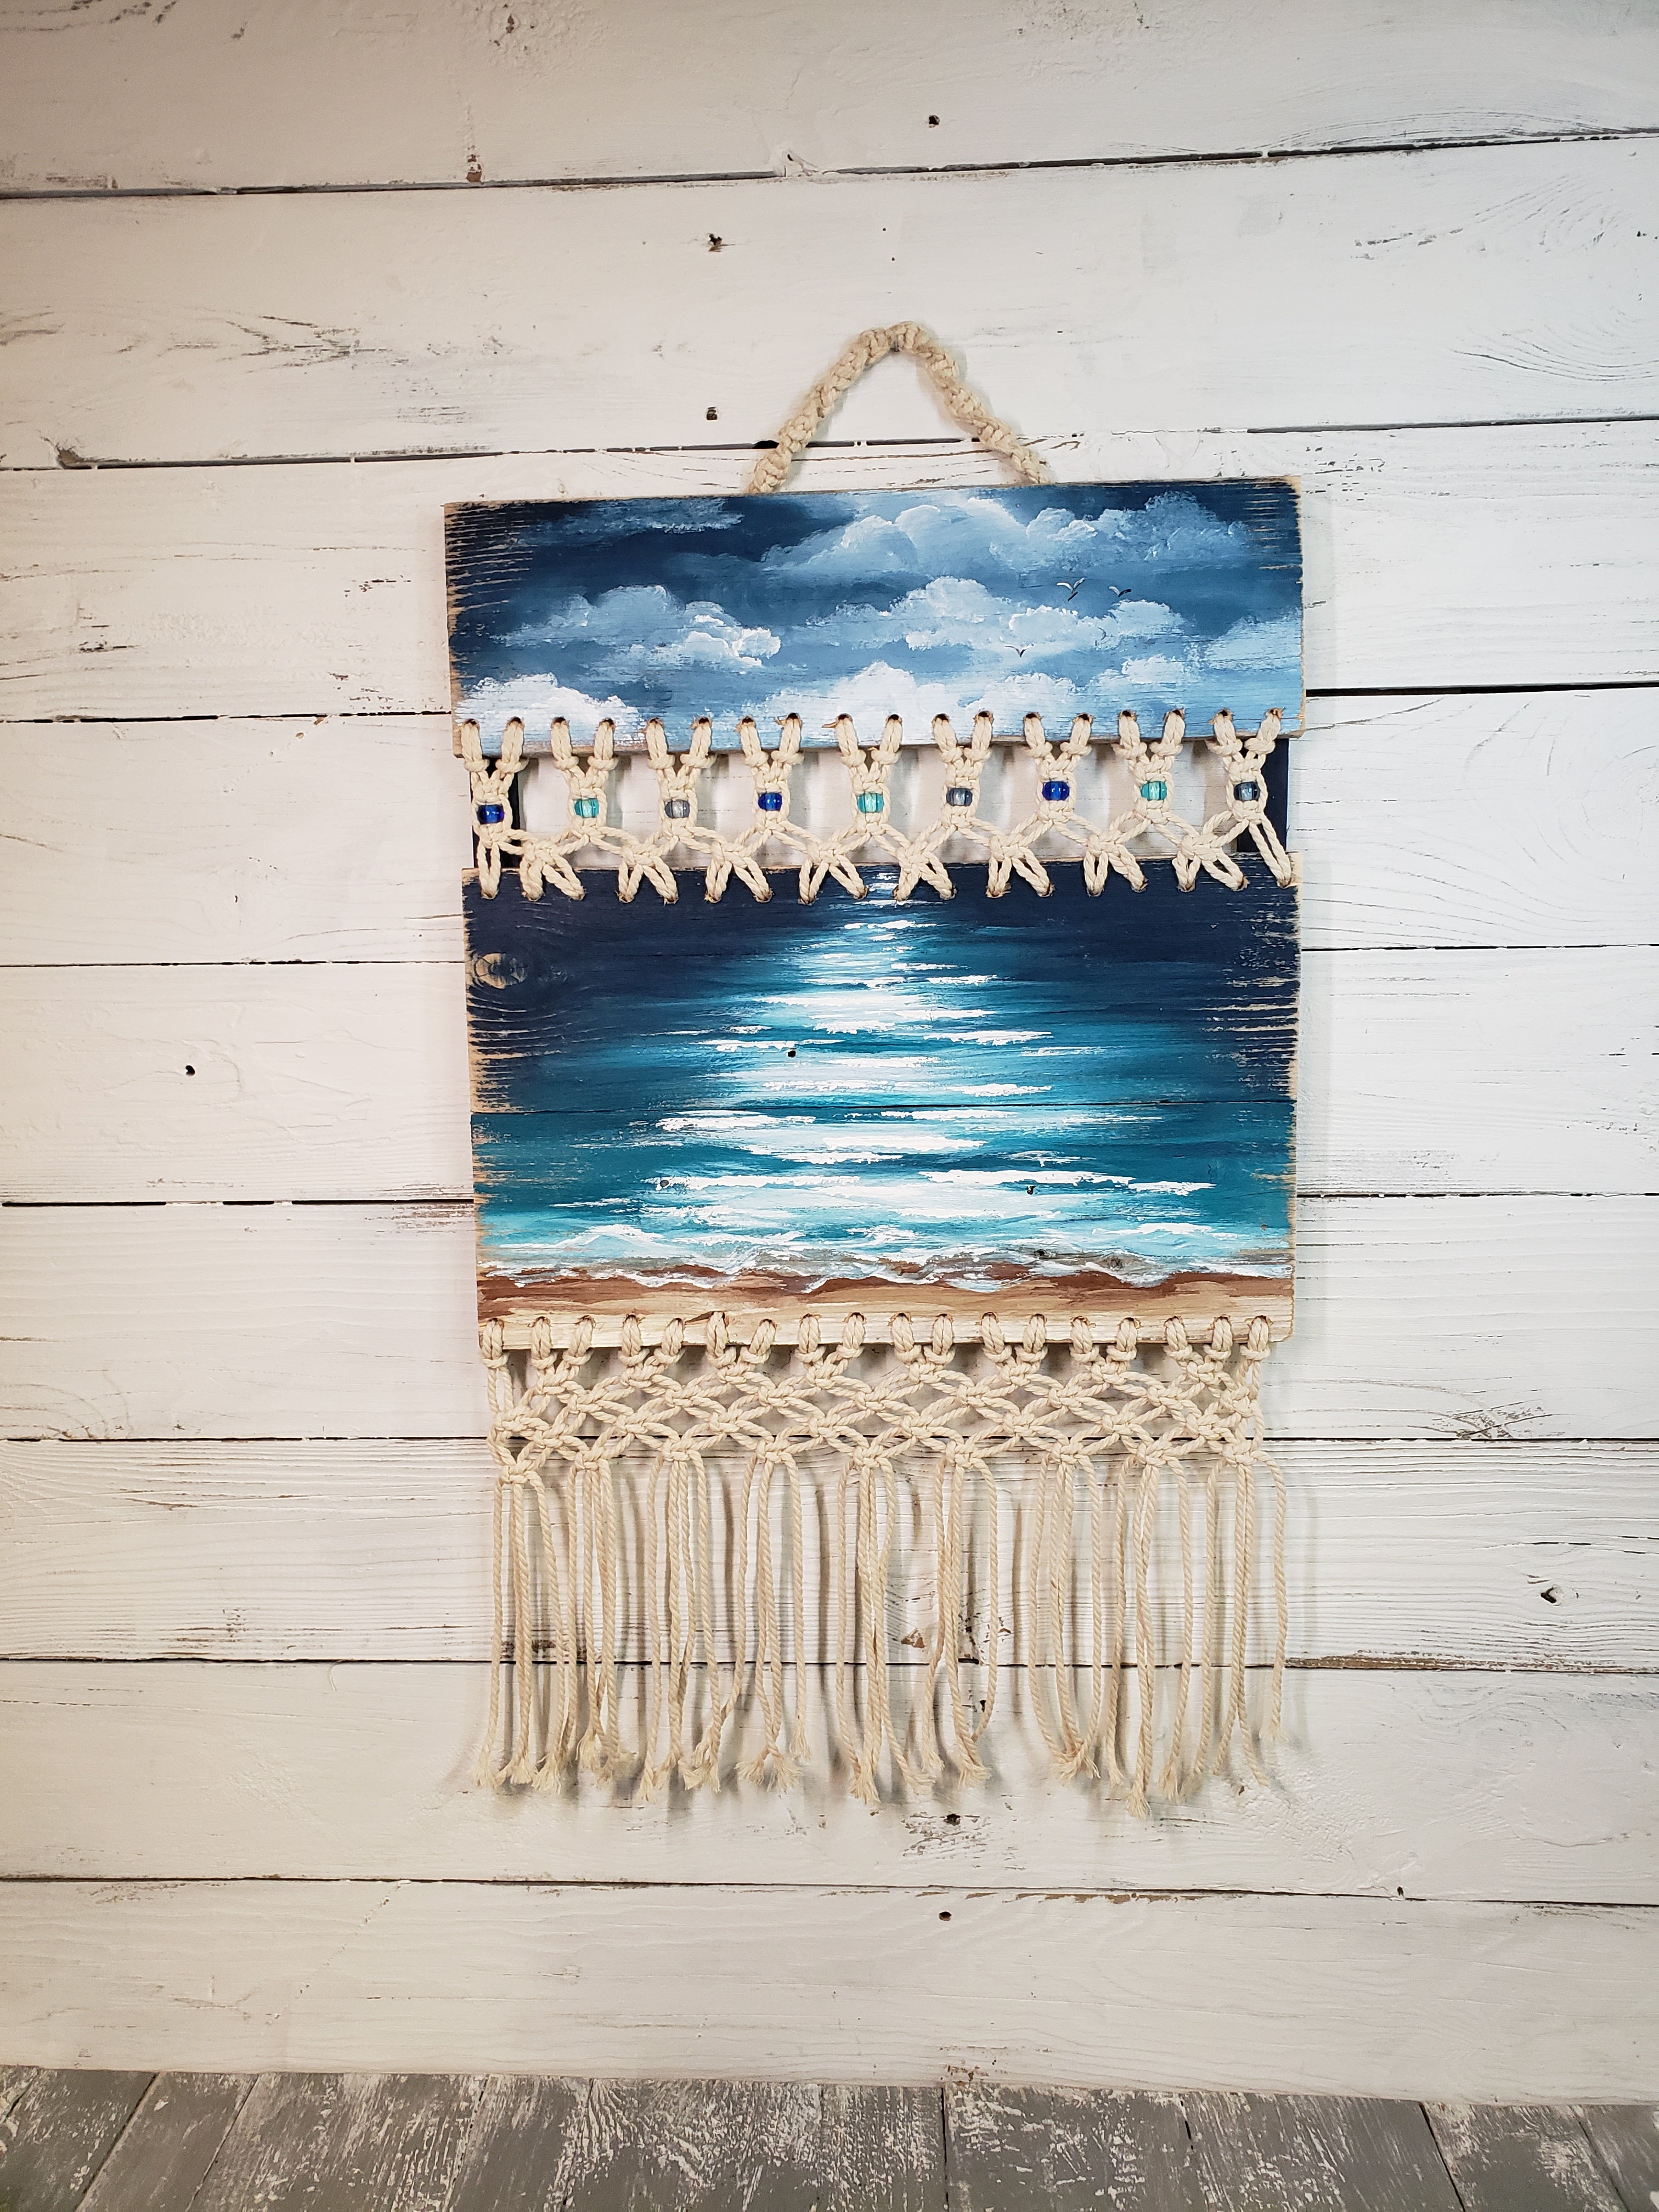 BOHO Macrame Beach painting on pallet wood, beach life, Glass beads, hand painted nautical ocean painting, cottage decorations